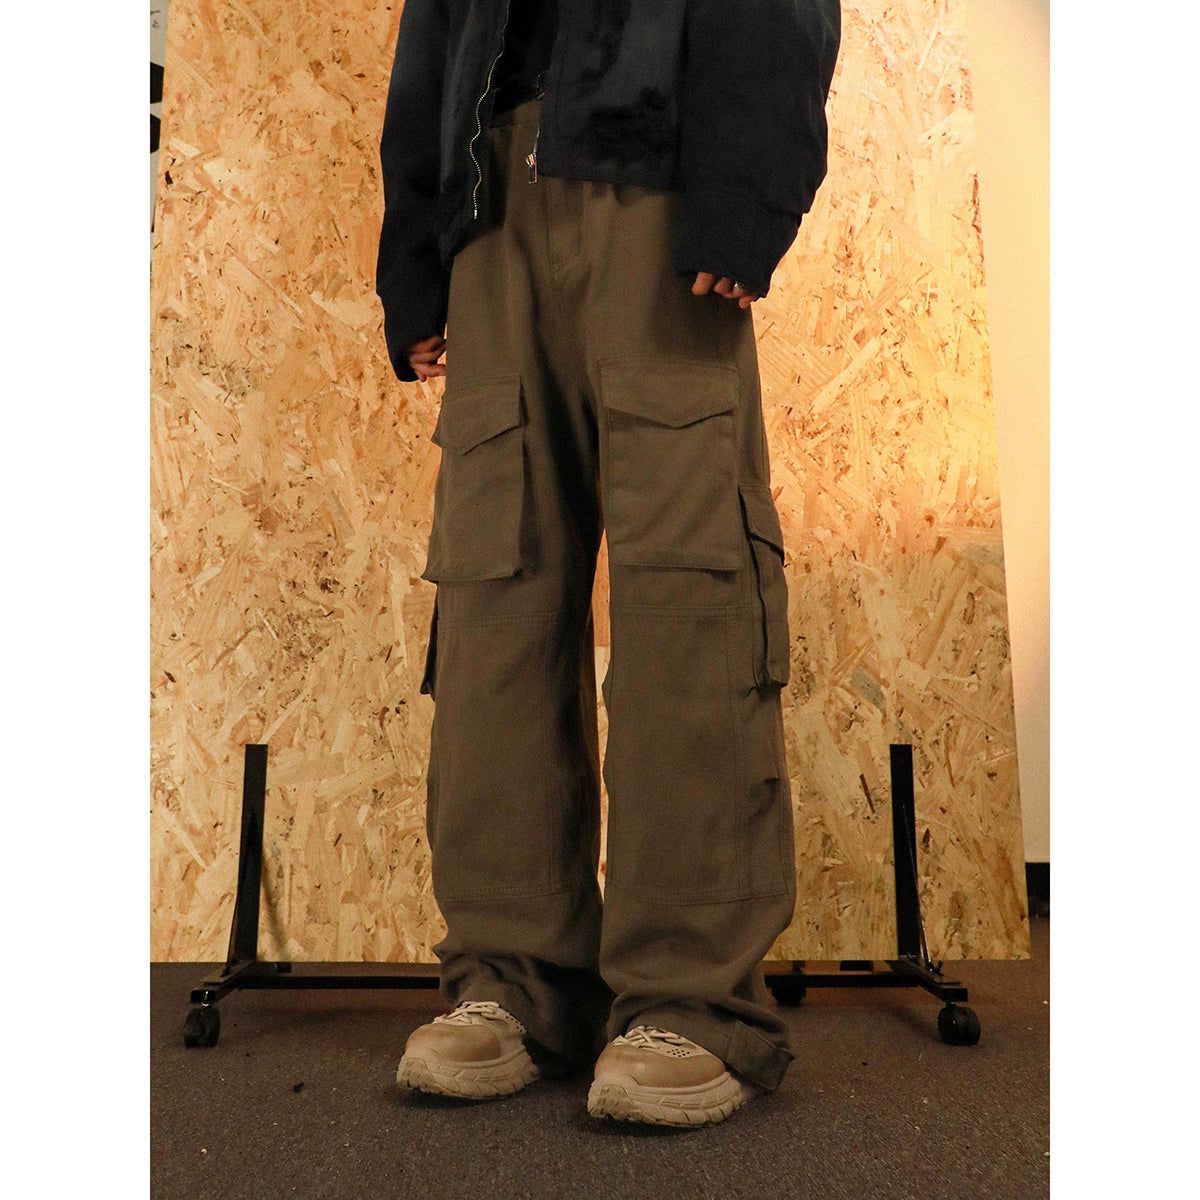 Wash Flap Pocket Cargo Pants Korean Street Fashion Pants By Mr Nearly Shop Online at OH Vault